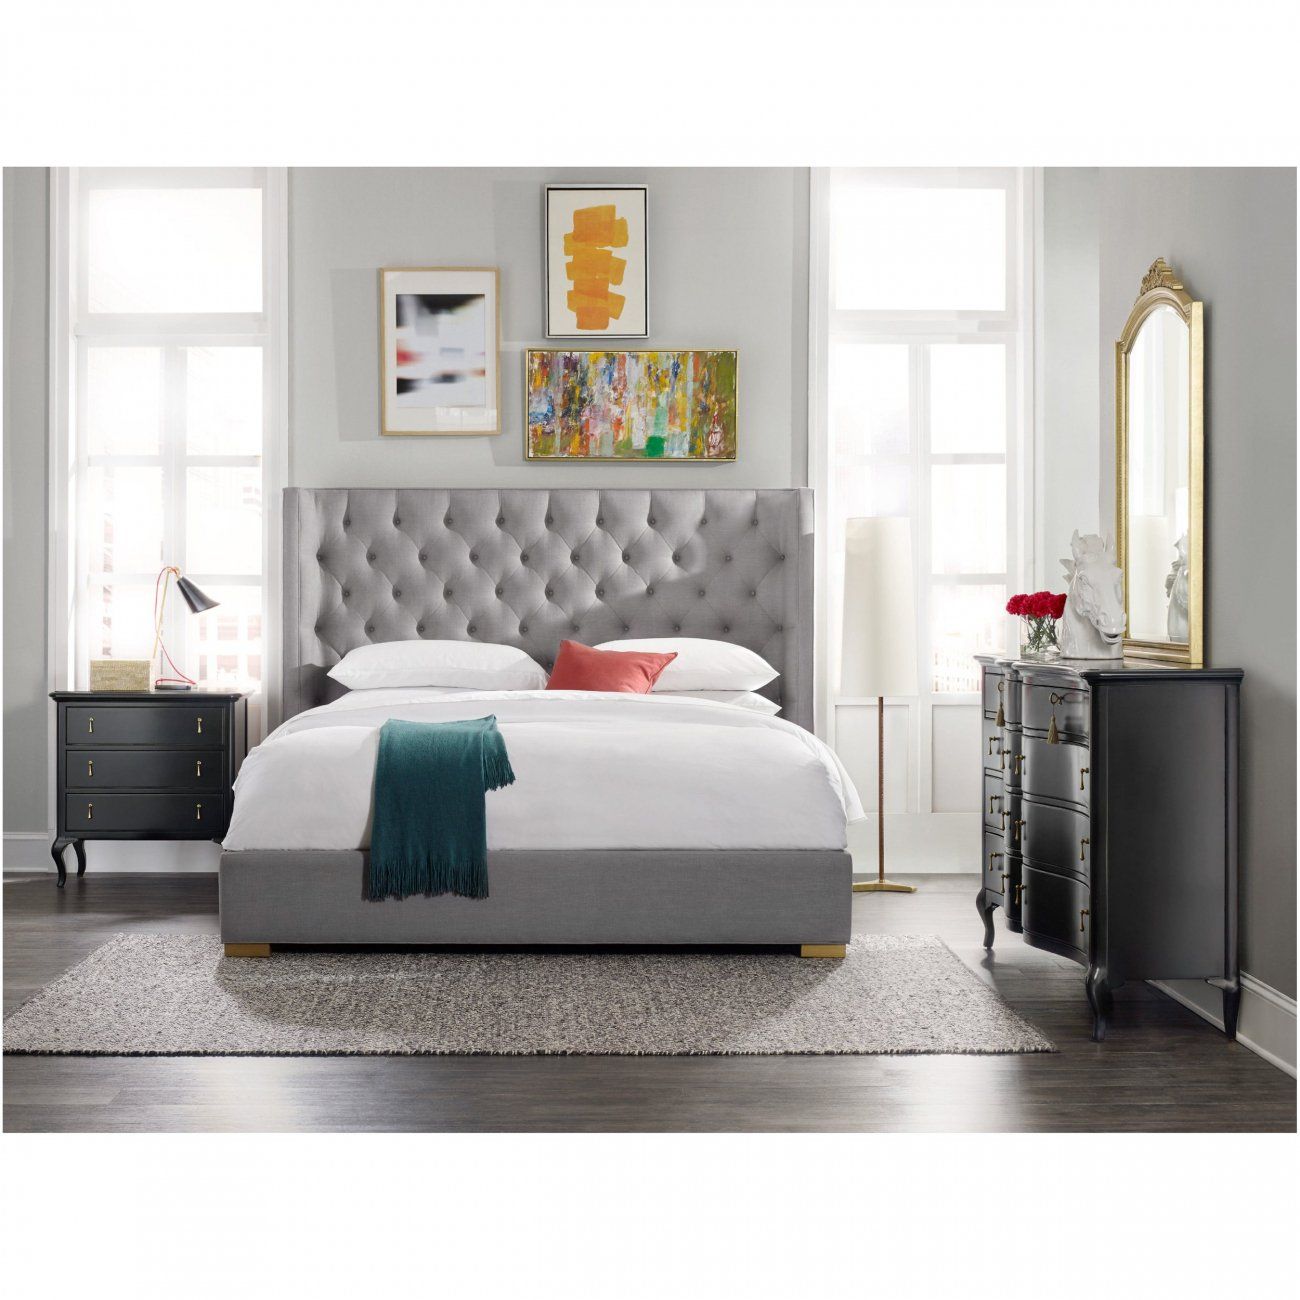 Double bed with upholstered headboard 160x200 cm gray Hamel